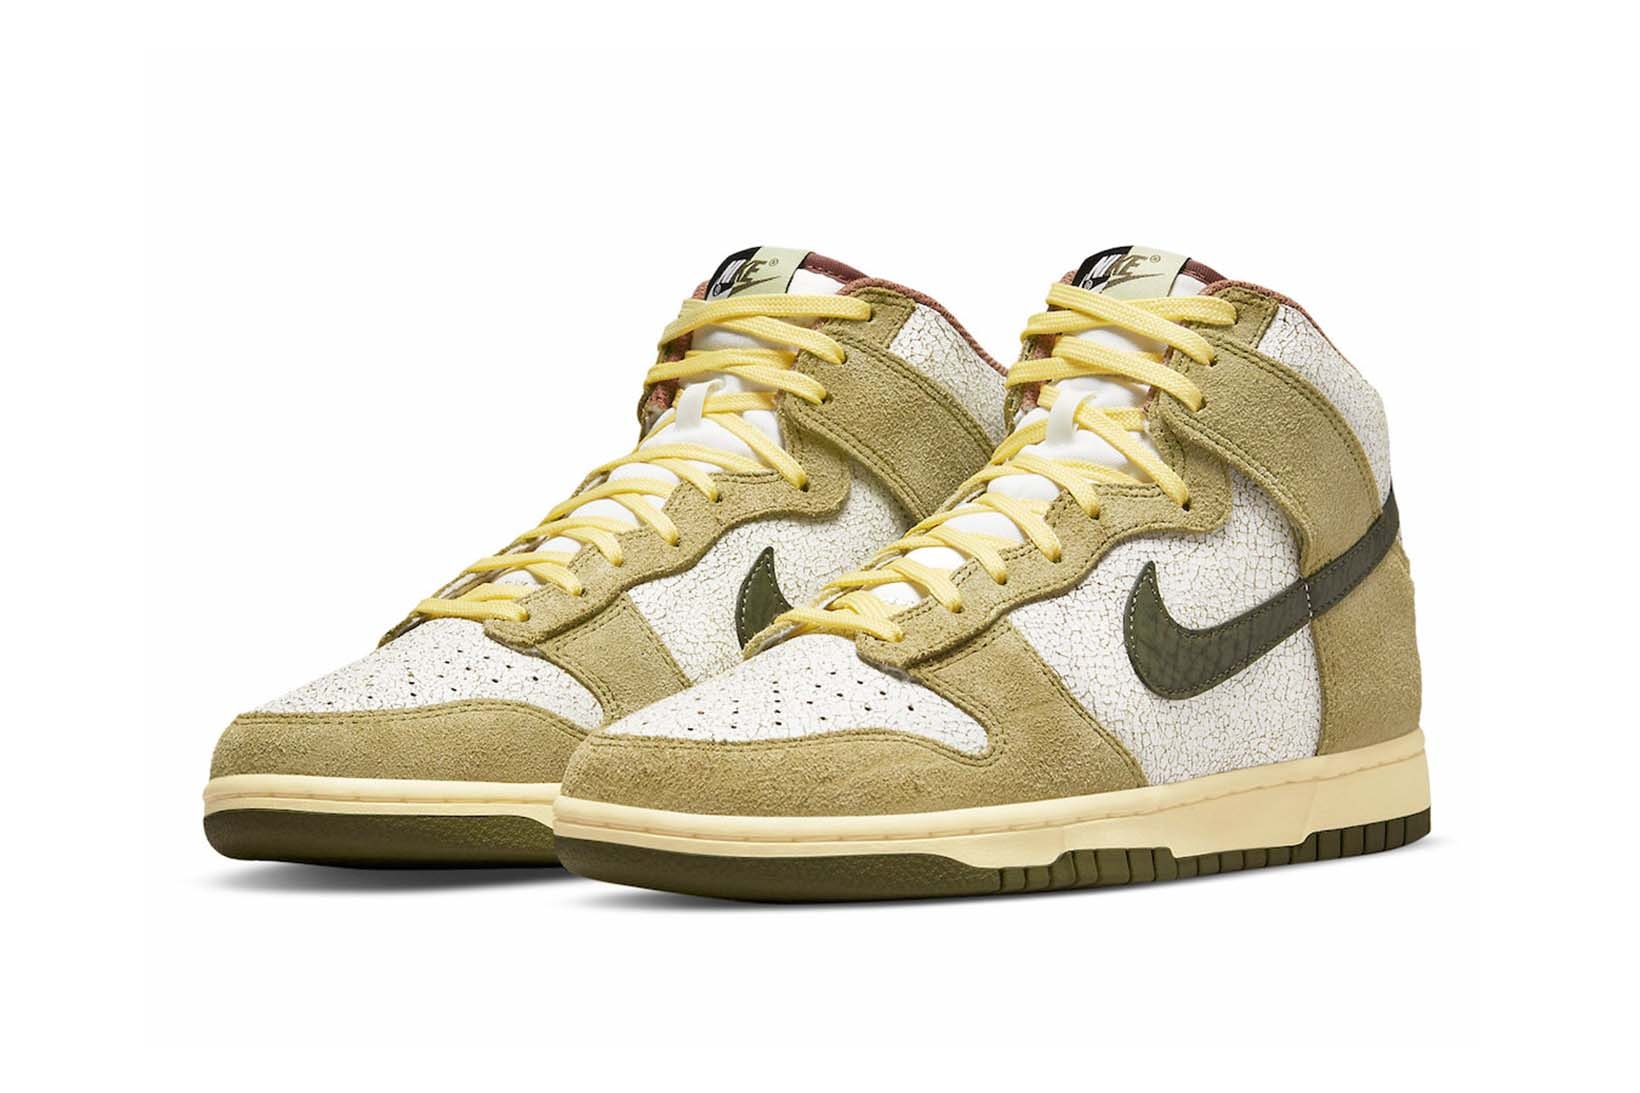 Nike Dunk High Re-Raw Coriander Summit White Cracked Leather Price Release Date